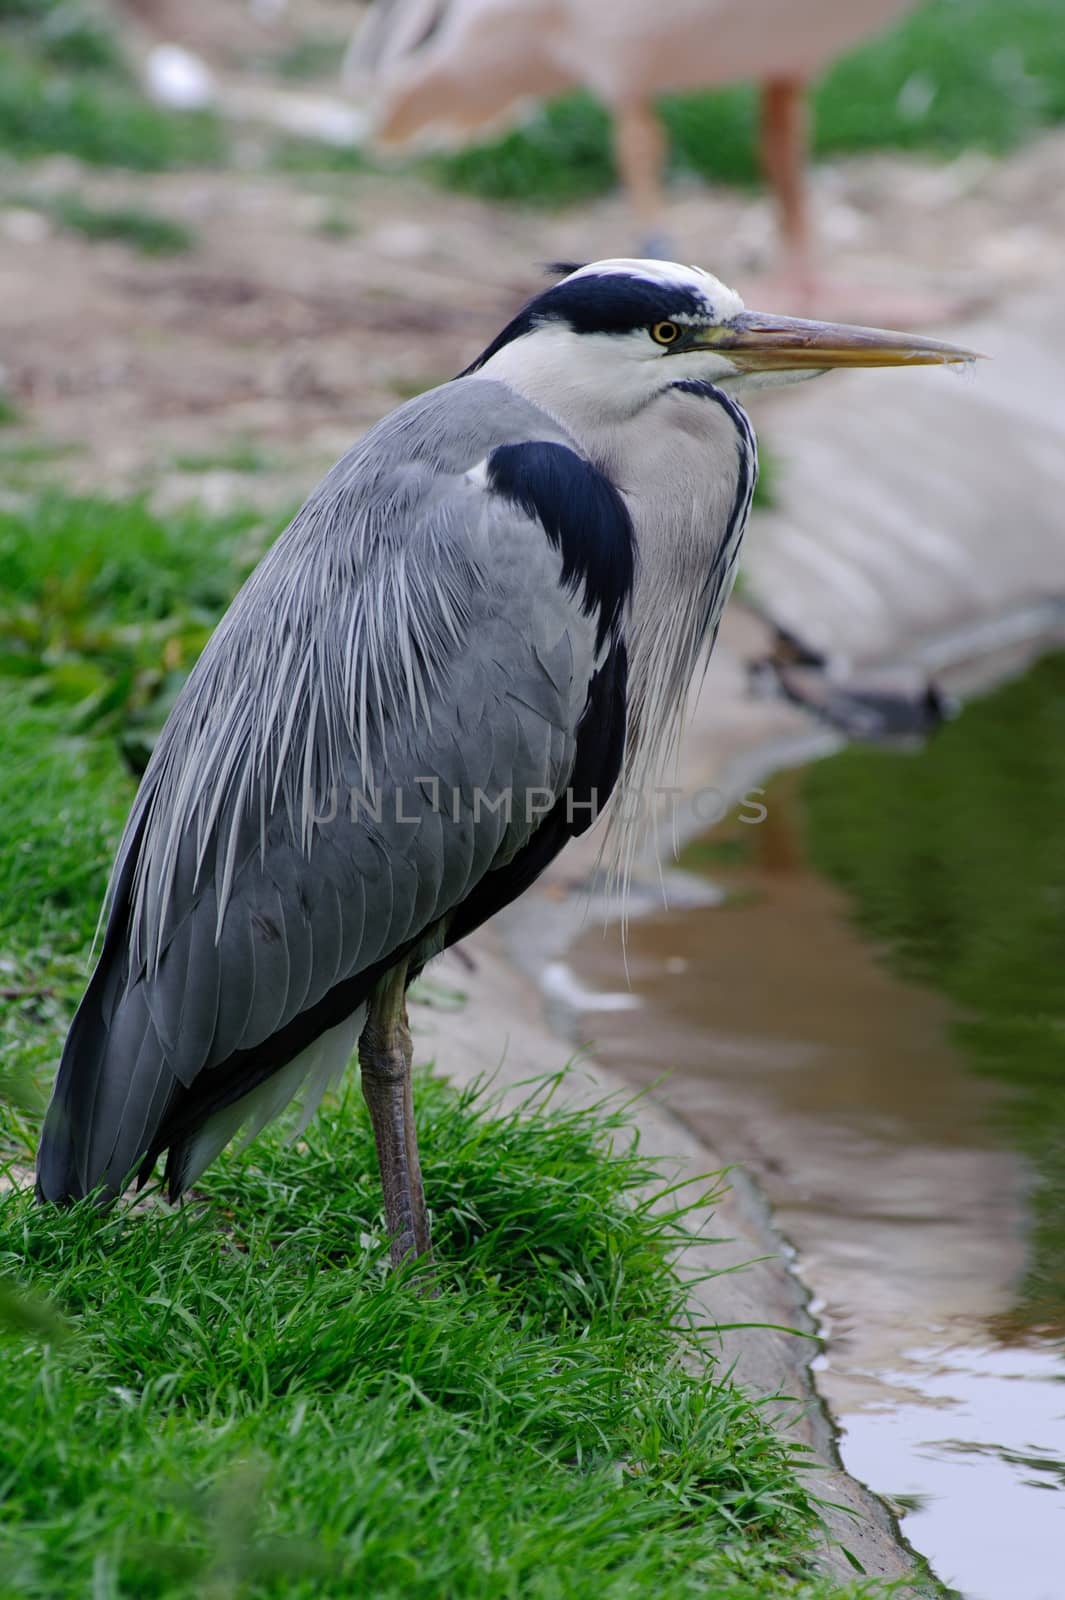 Grey heron by pool side on grass